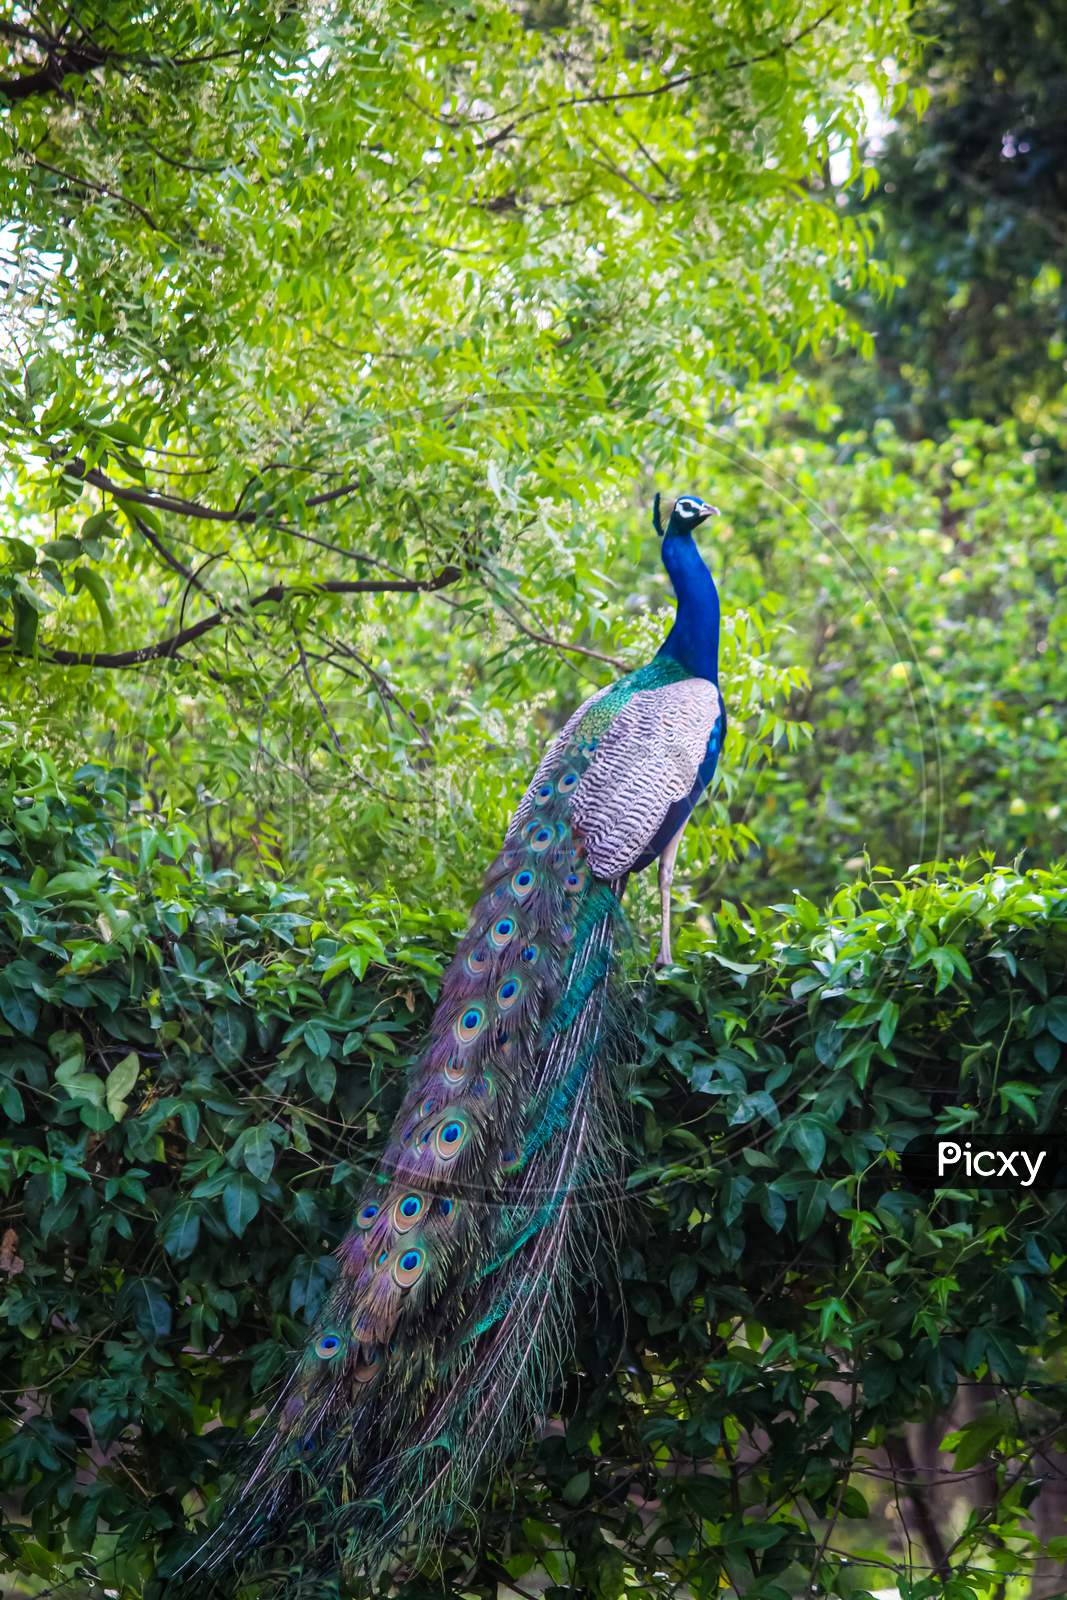 A peacock in the forest